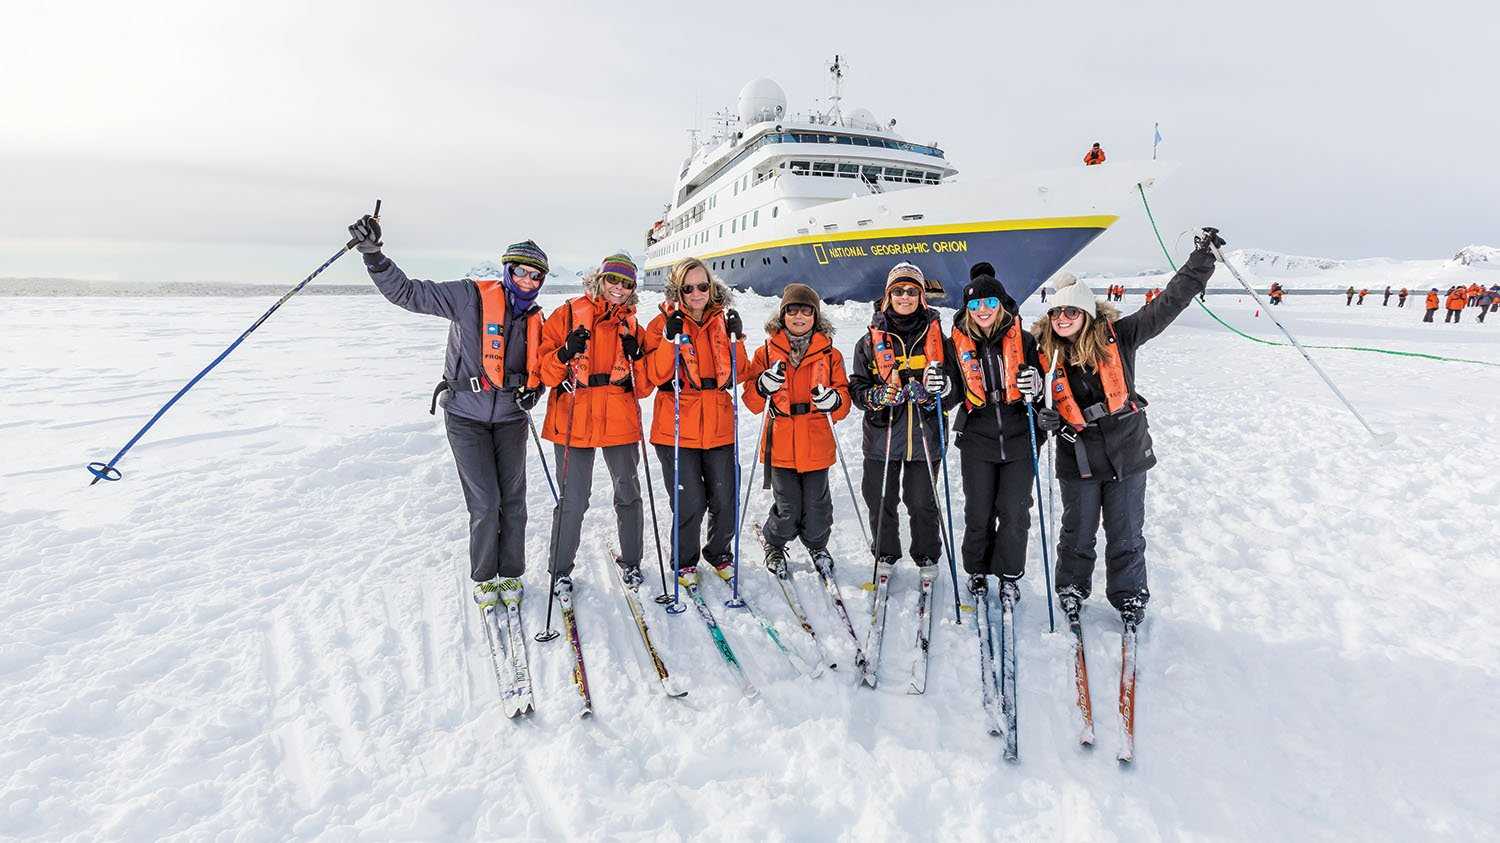 A group of guests cross country skiing pose in front the National Geographic Orion in Antarctica